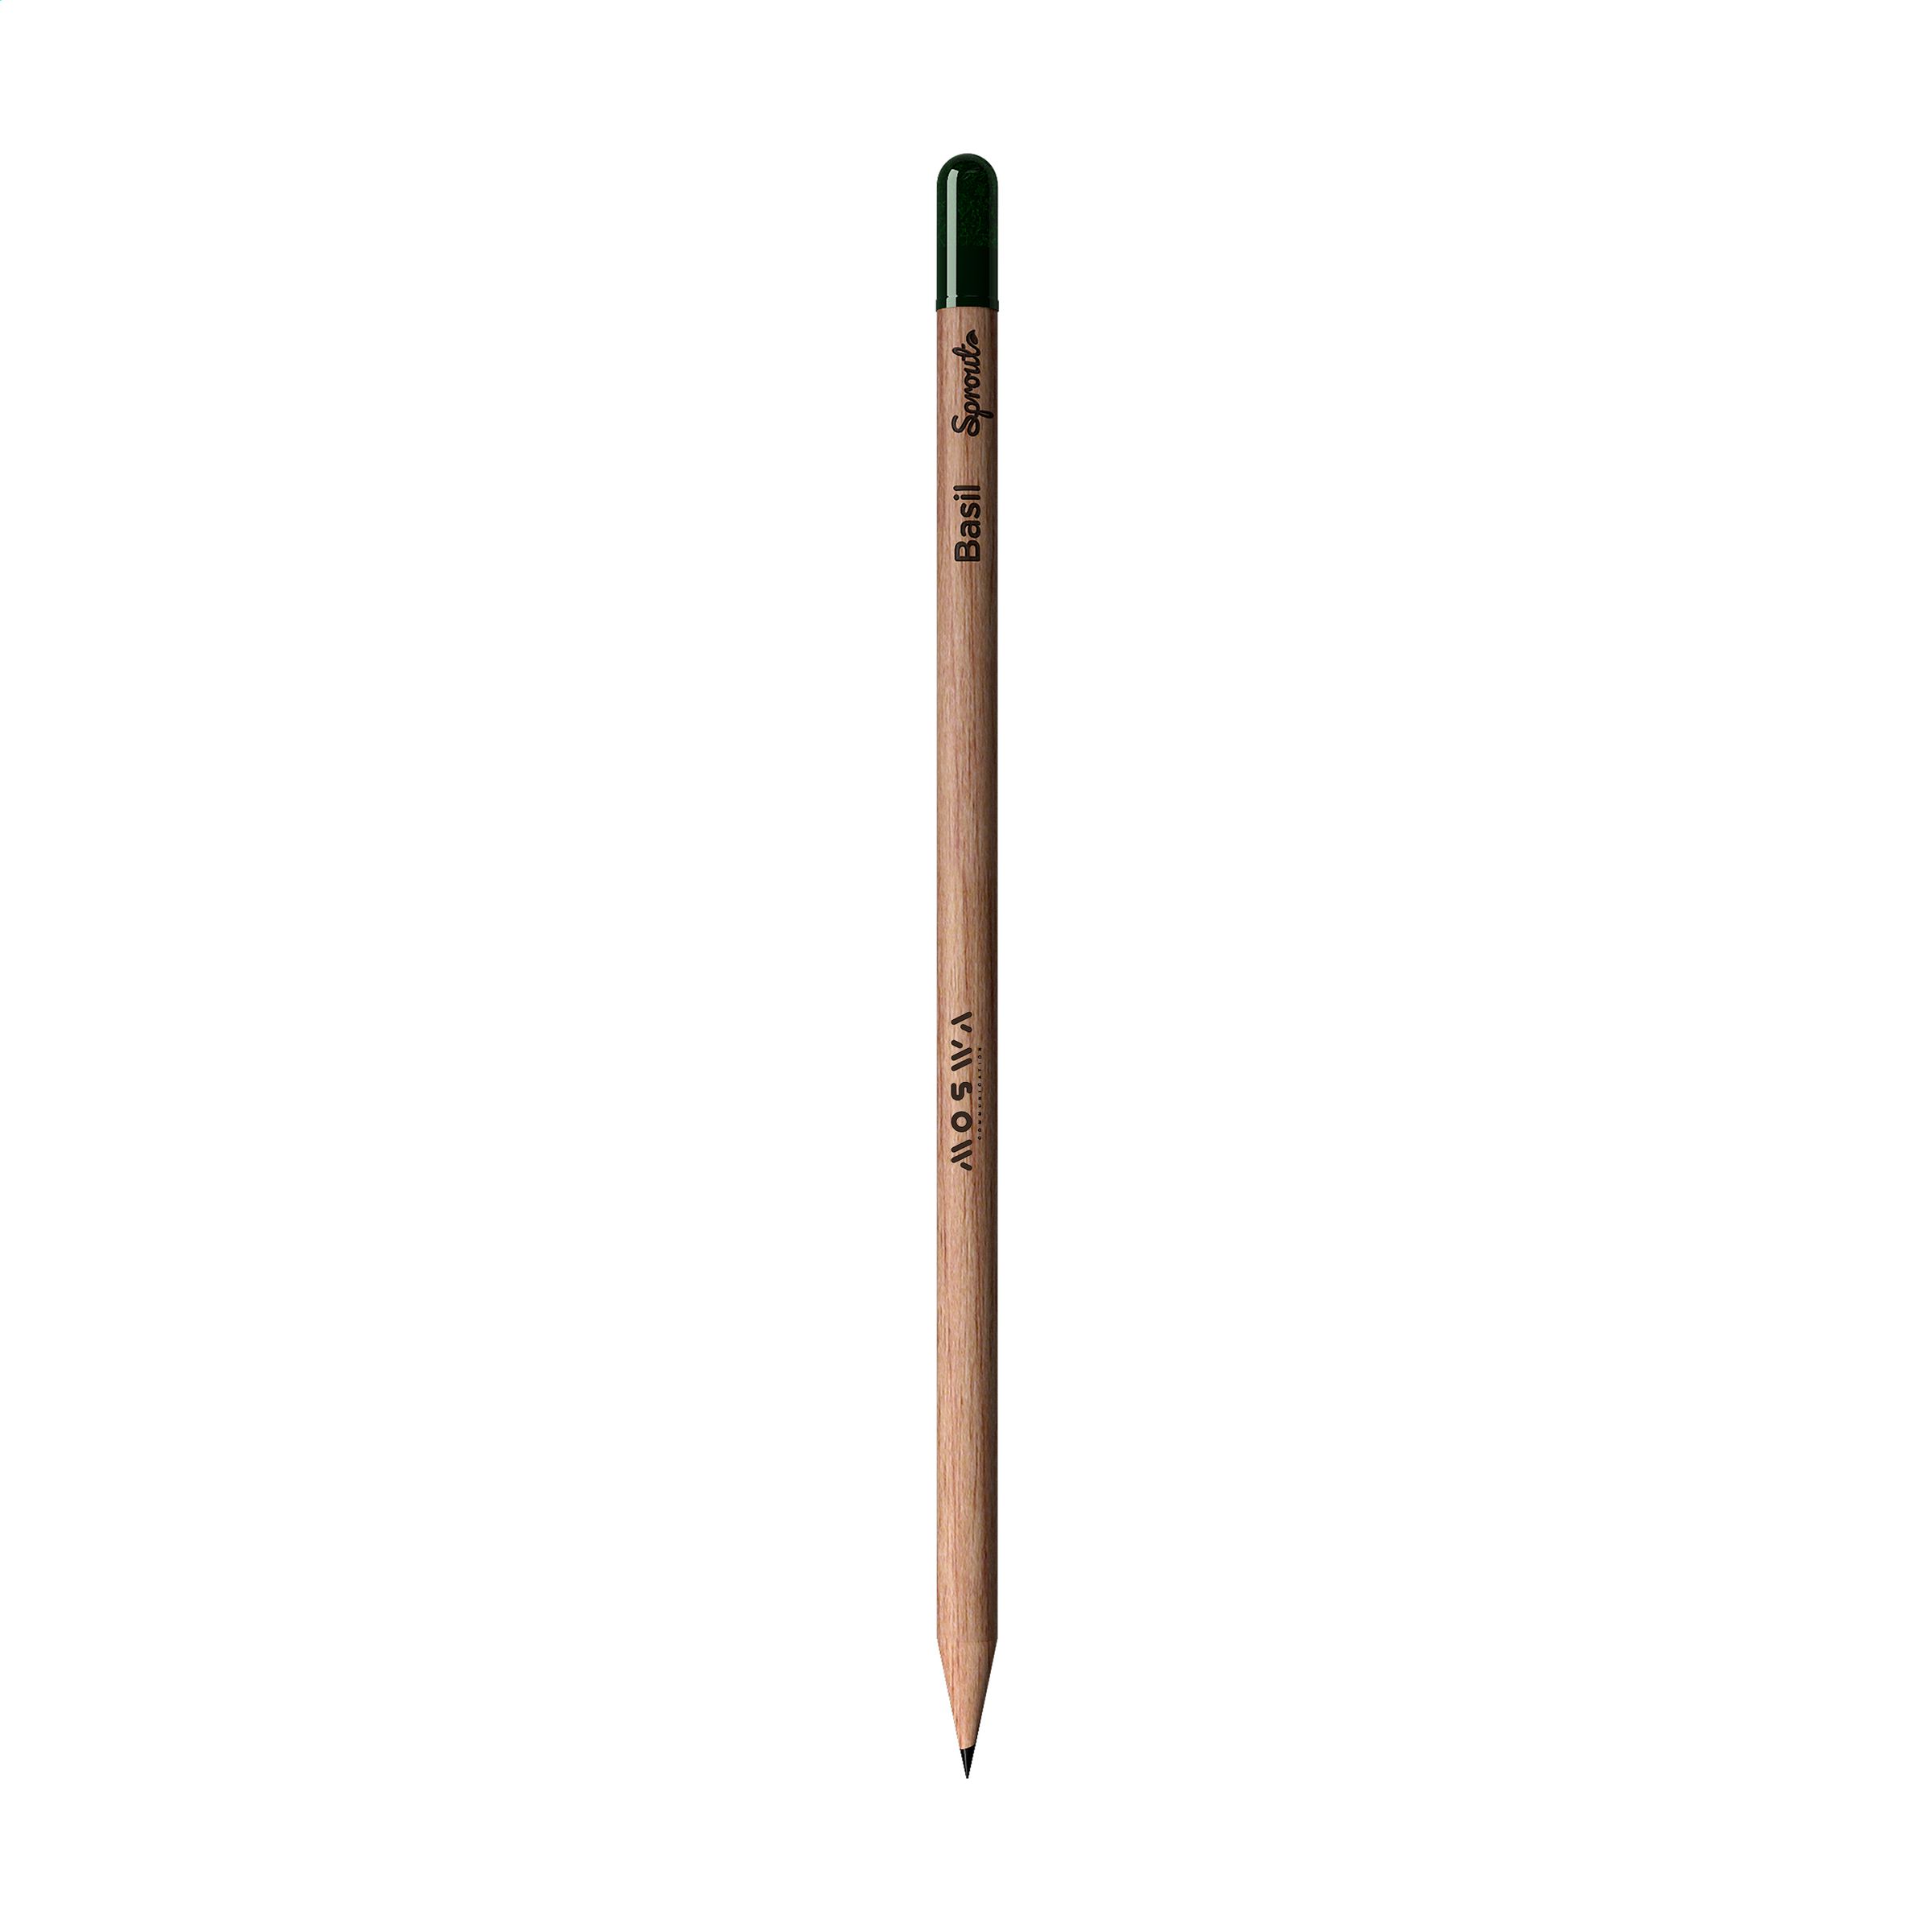 Sproutworld Sharpened Pencil crayon taillé